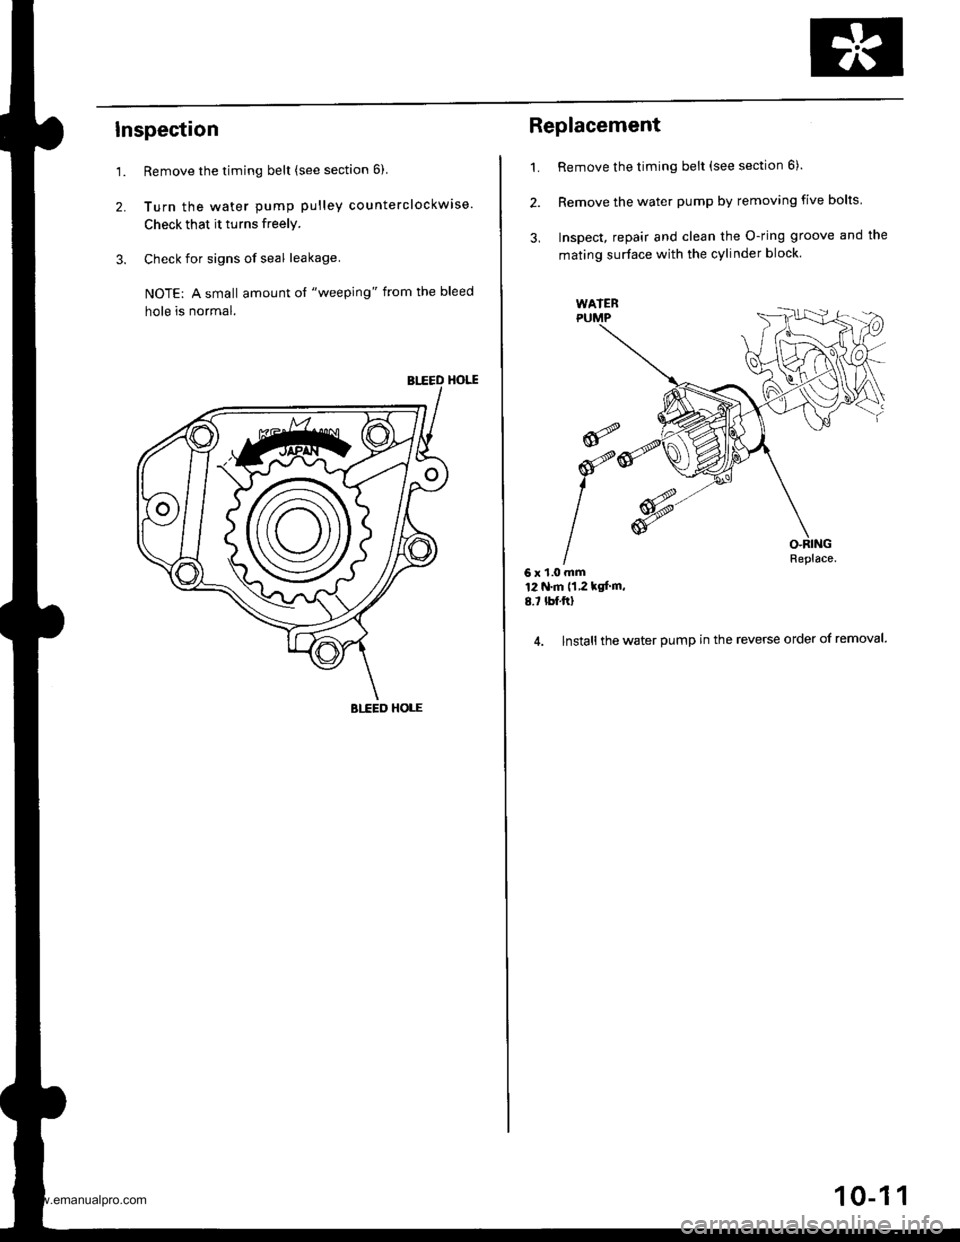 HONDA CR-V 1999 RD1-RD3 / 1.G Workshop Manual 
Inspection
1.
2.
Remove the timing belt (see section 6)
Turn the water pump pulley counterclockwise.
Check that it turns freely.
Check for signs of seal leakage.
NOTE: A small amount ol "weeping" fro